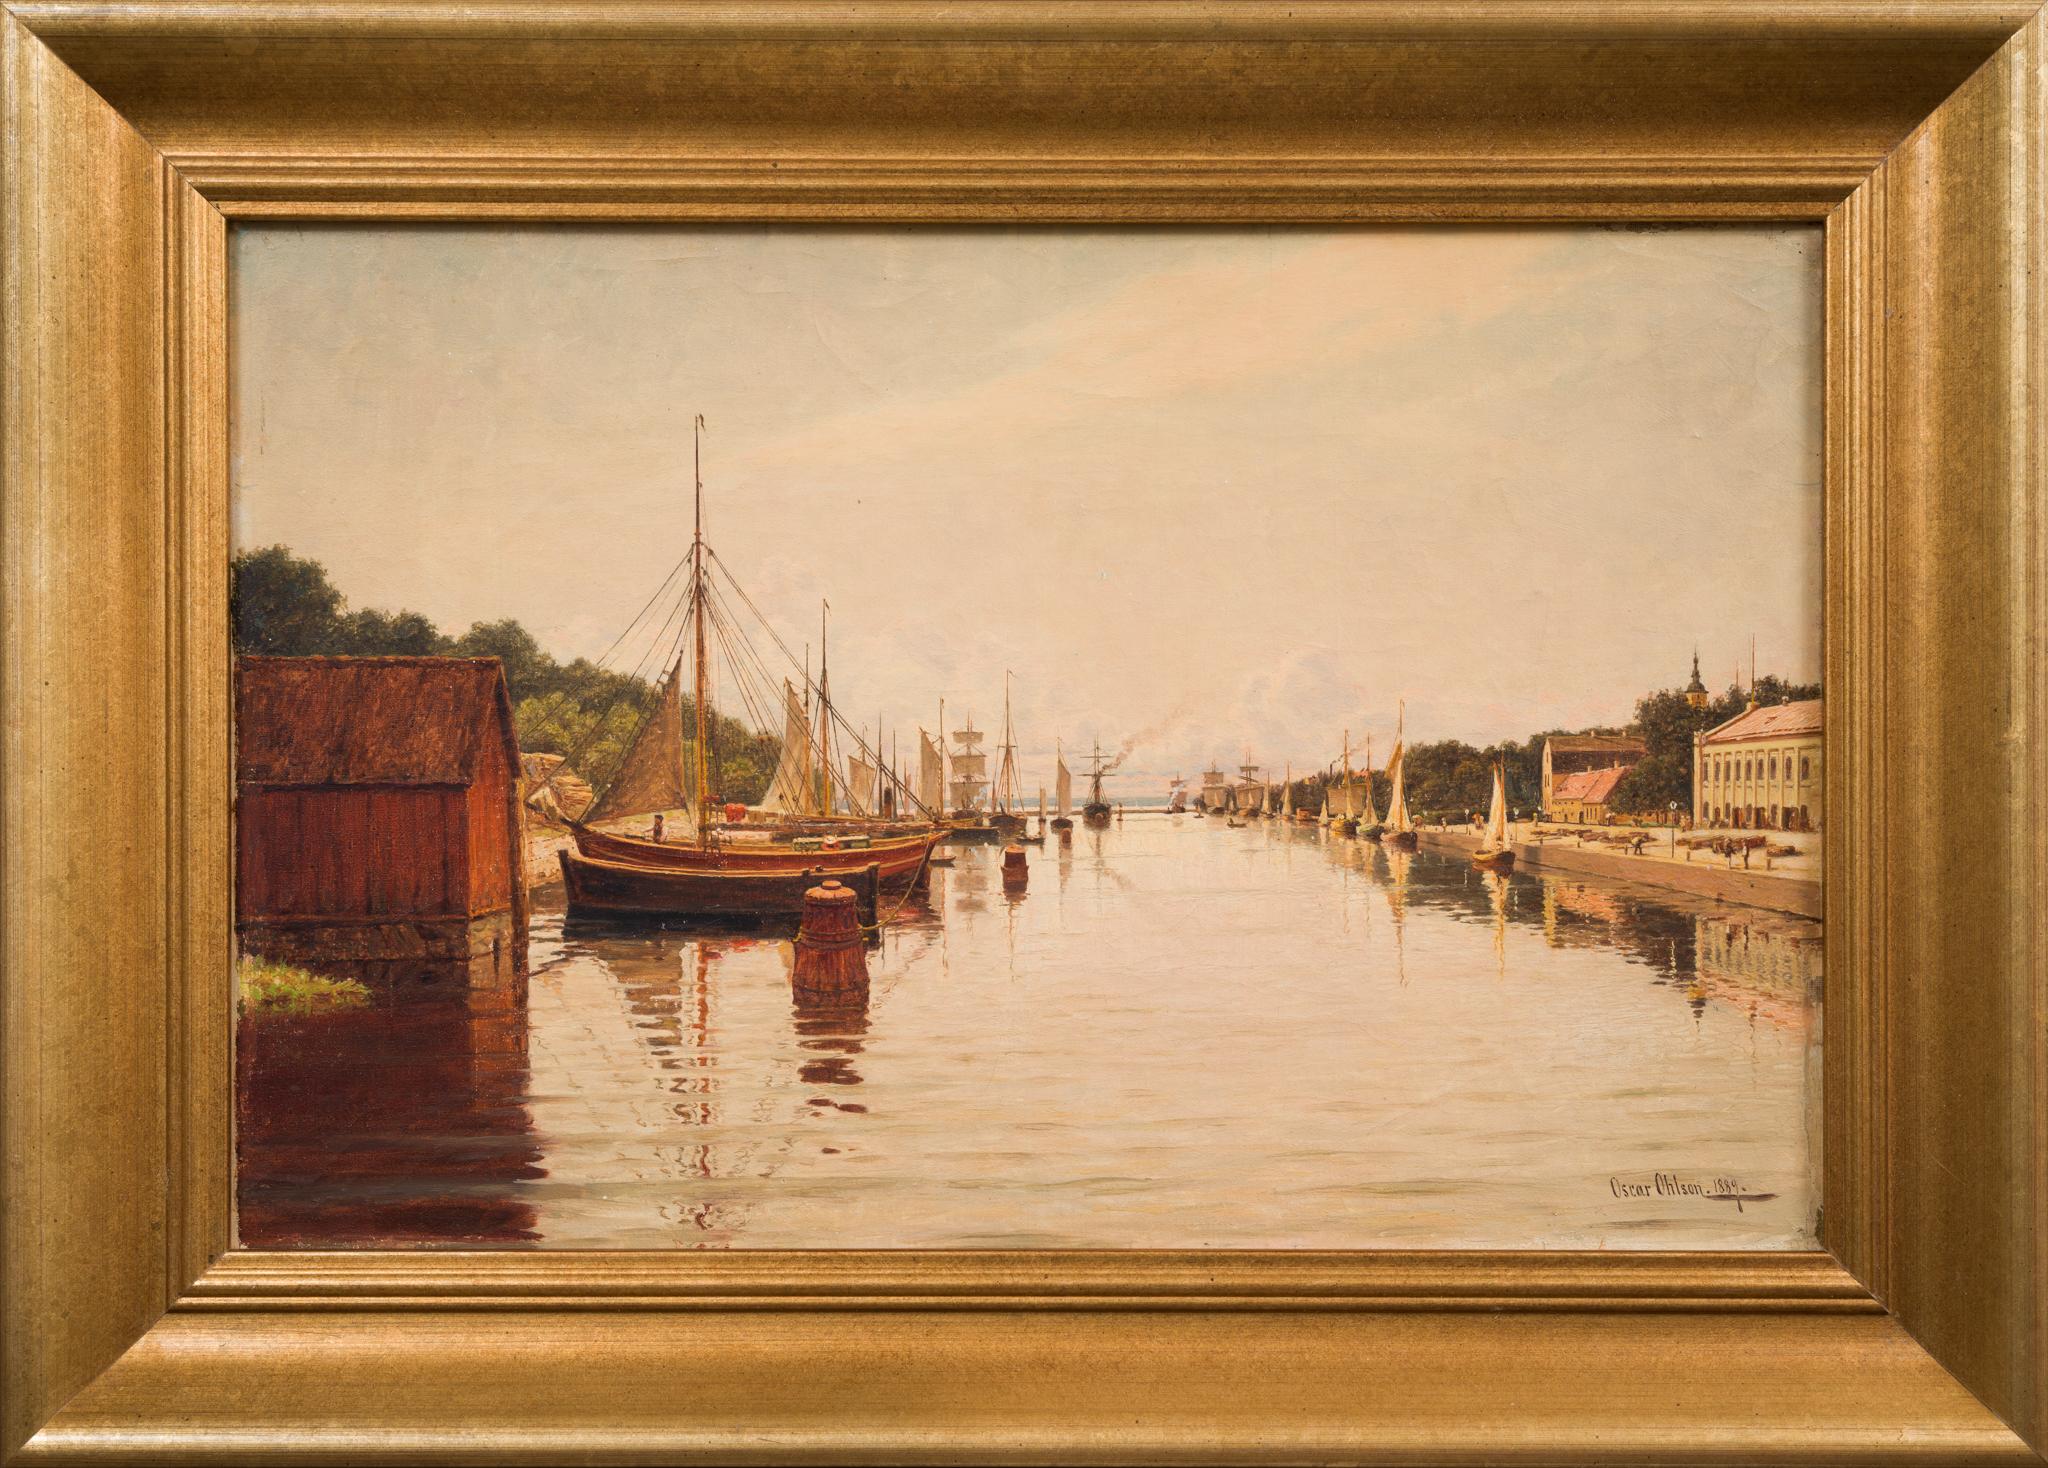 Oscar Ohlson Landscape Painting - Halmstad Harbour Seen From the North, 1889